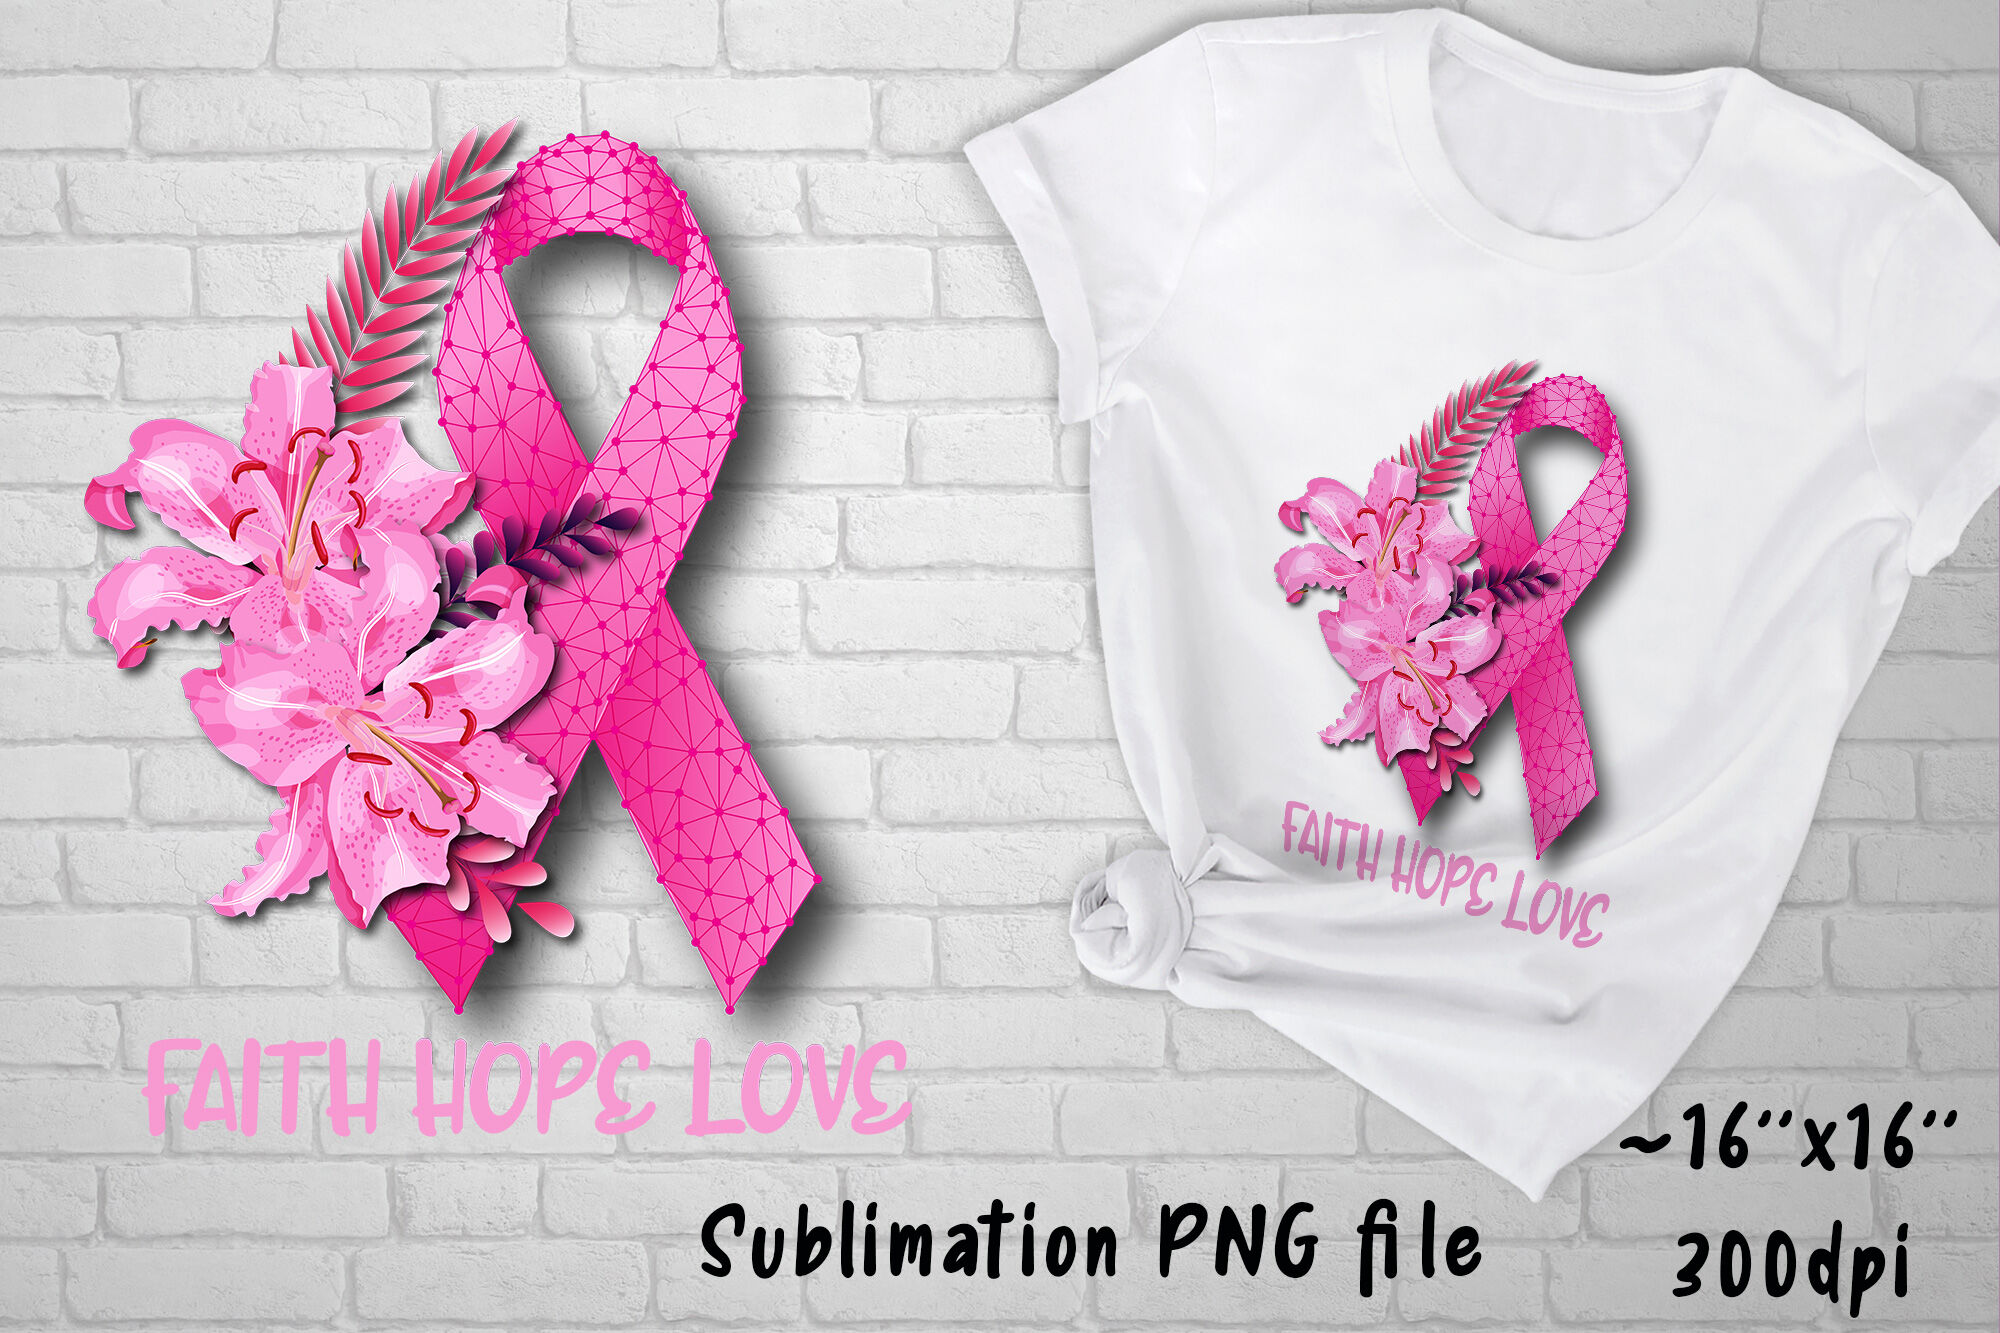 Breast Cancer Awareness Concept. Top View Photo of Pink Ribbon and